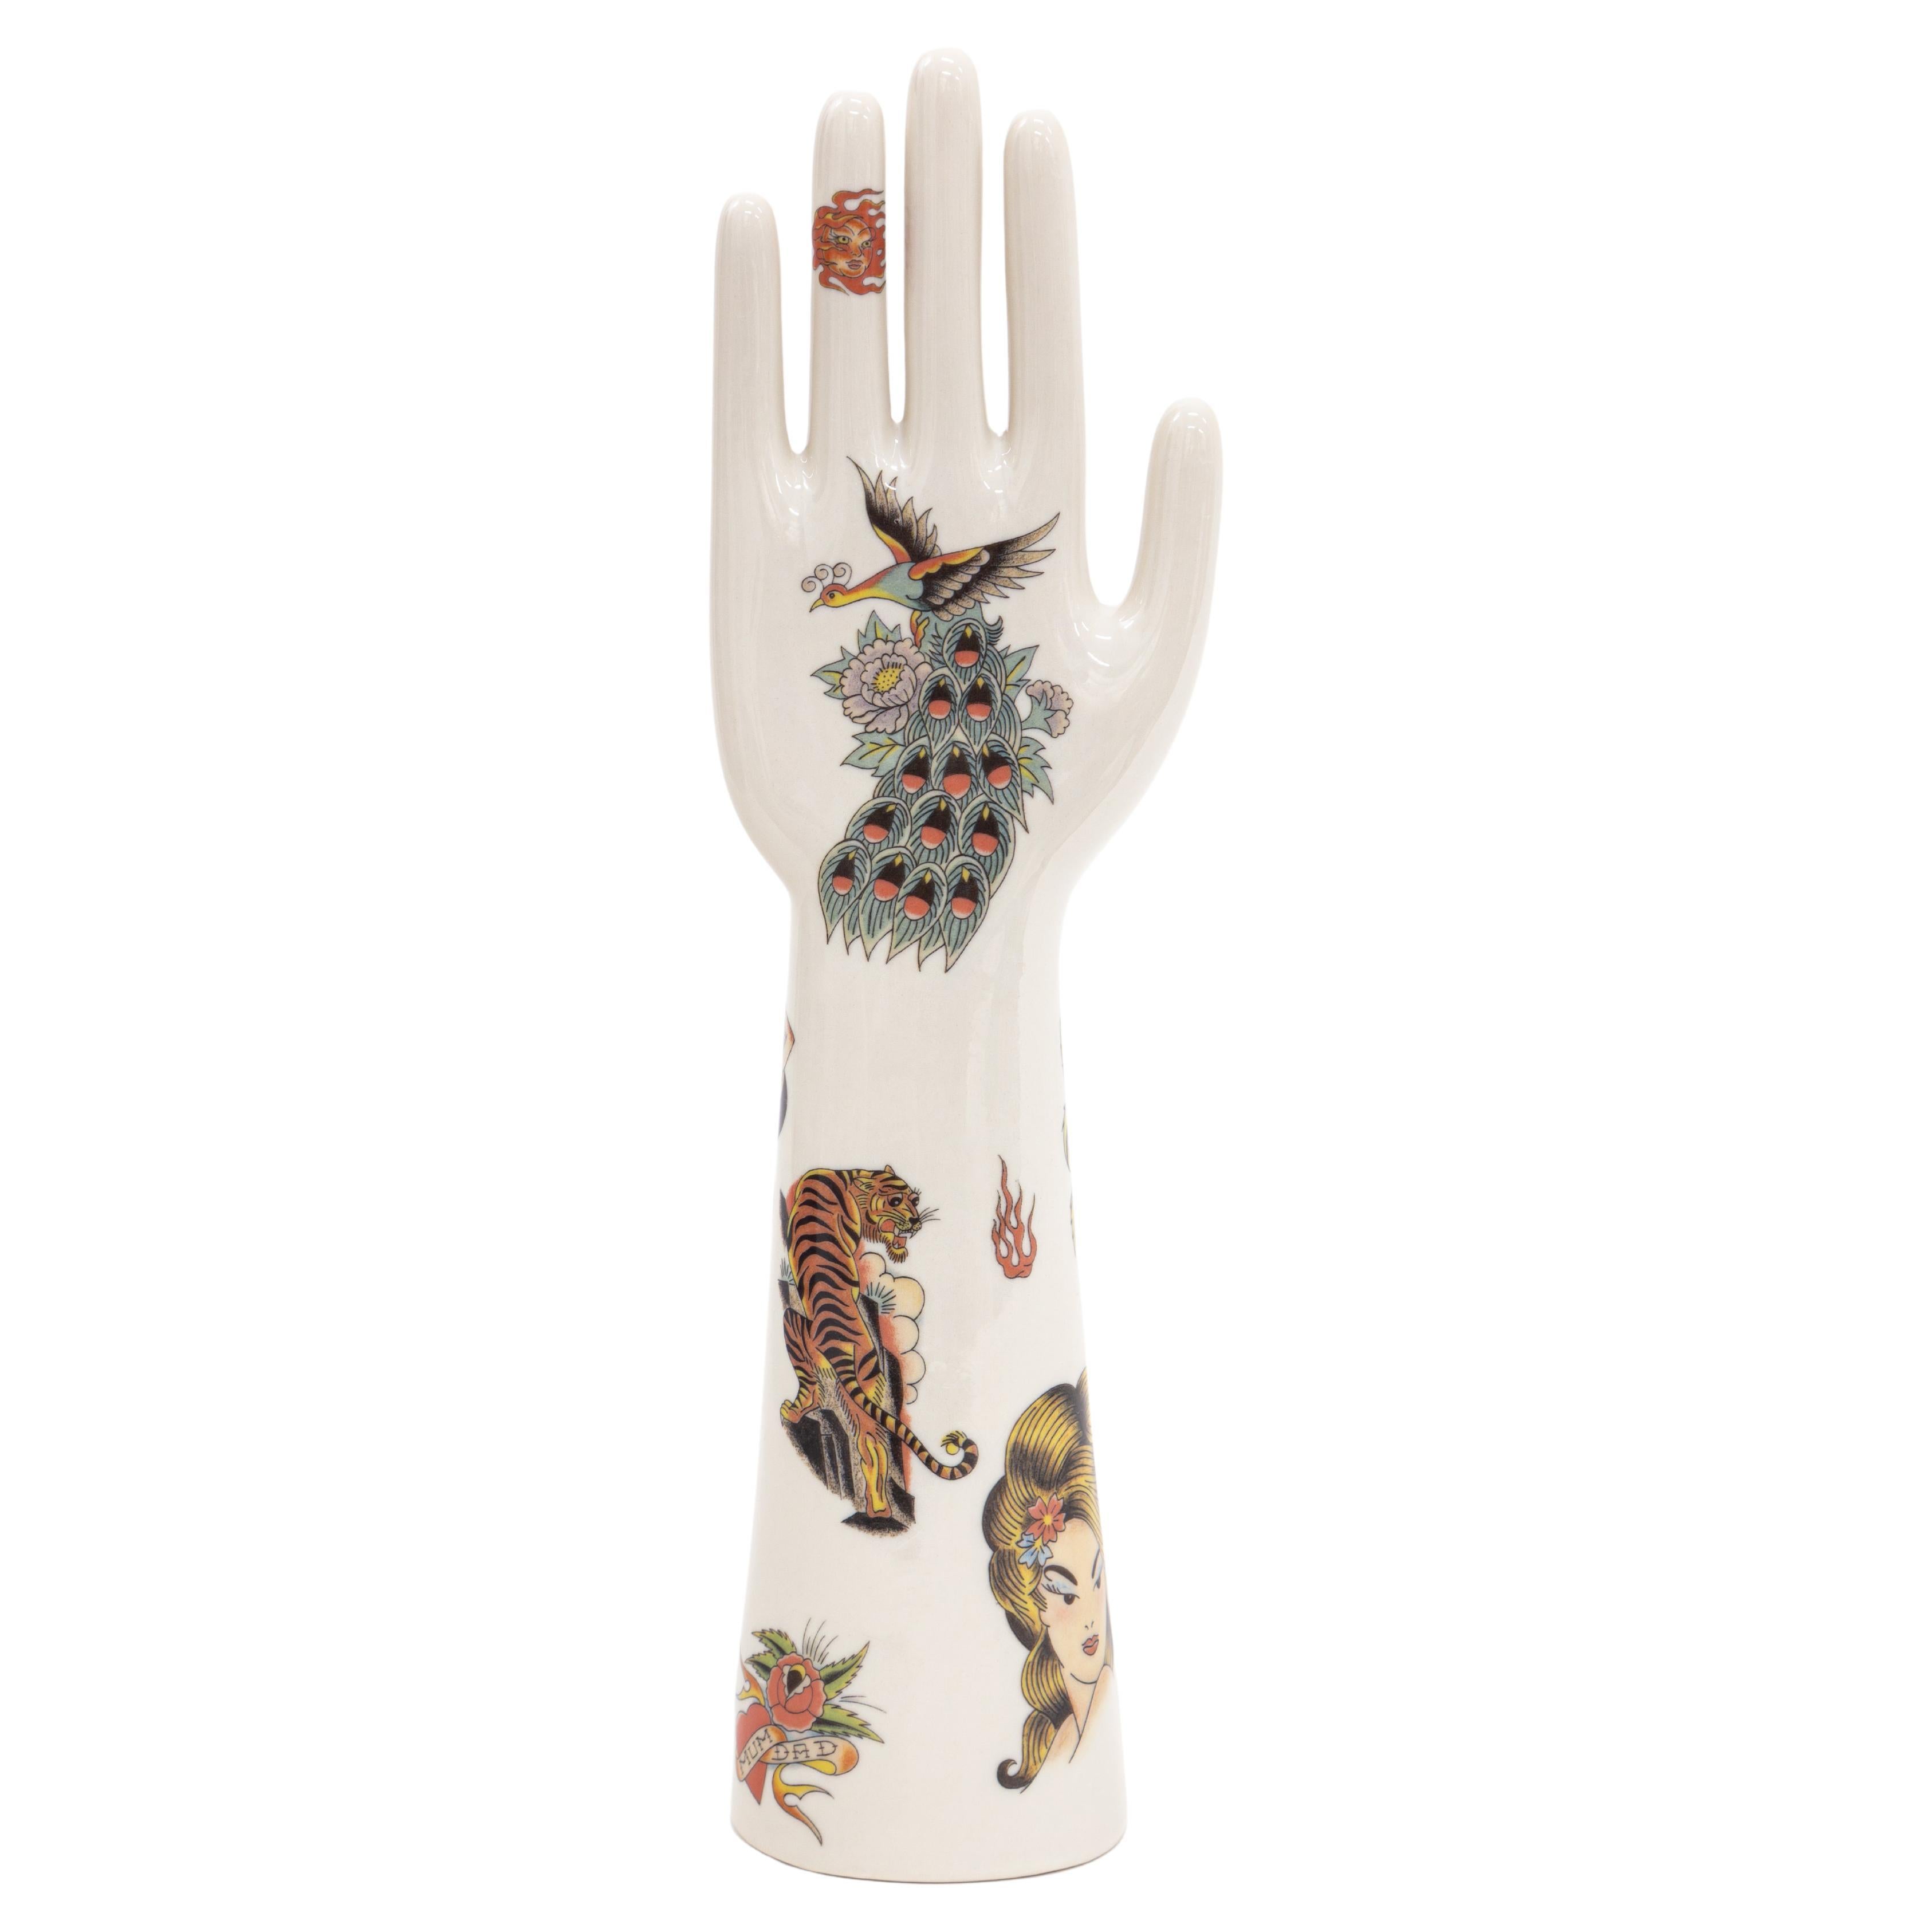 Anatomica, Porcelain Hand with Old School Tattoo Decoration by Vito Nesta For Sale